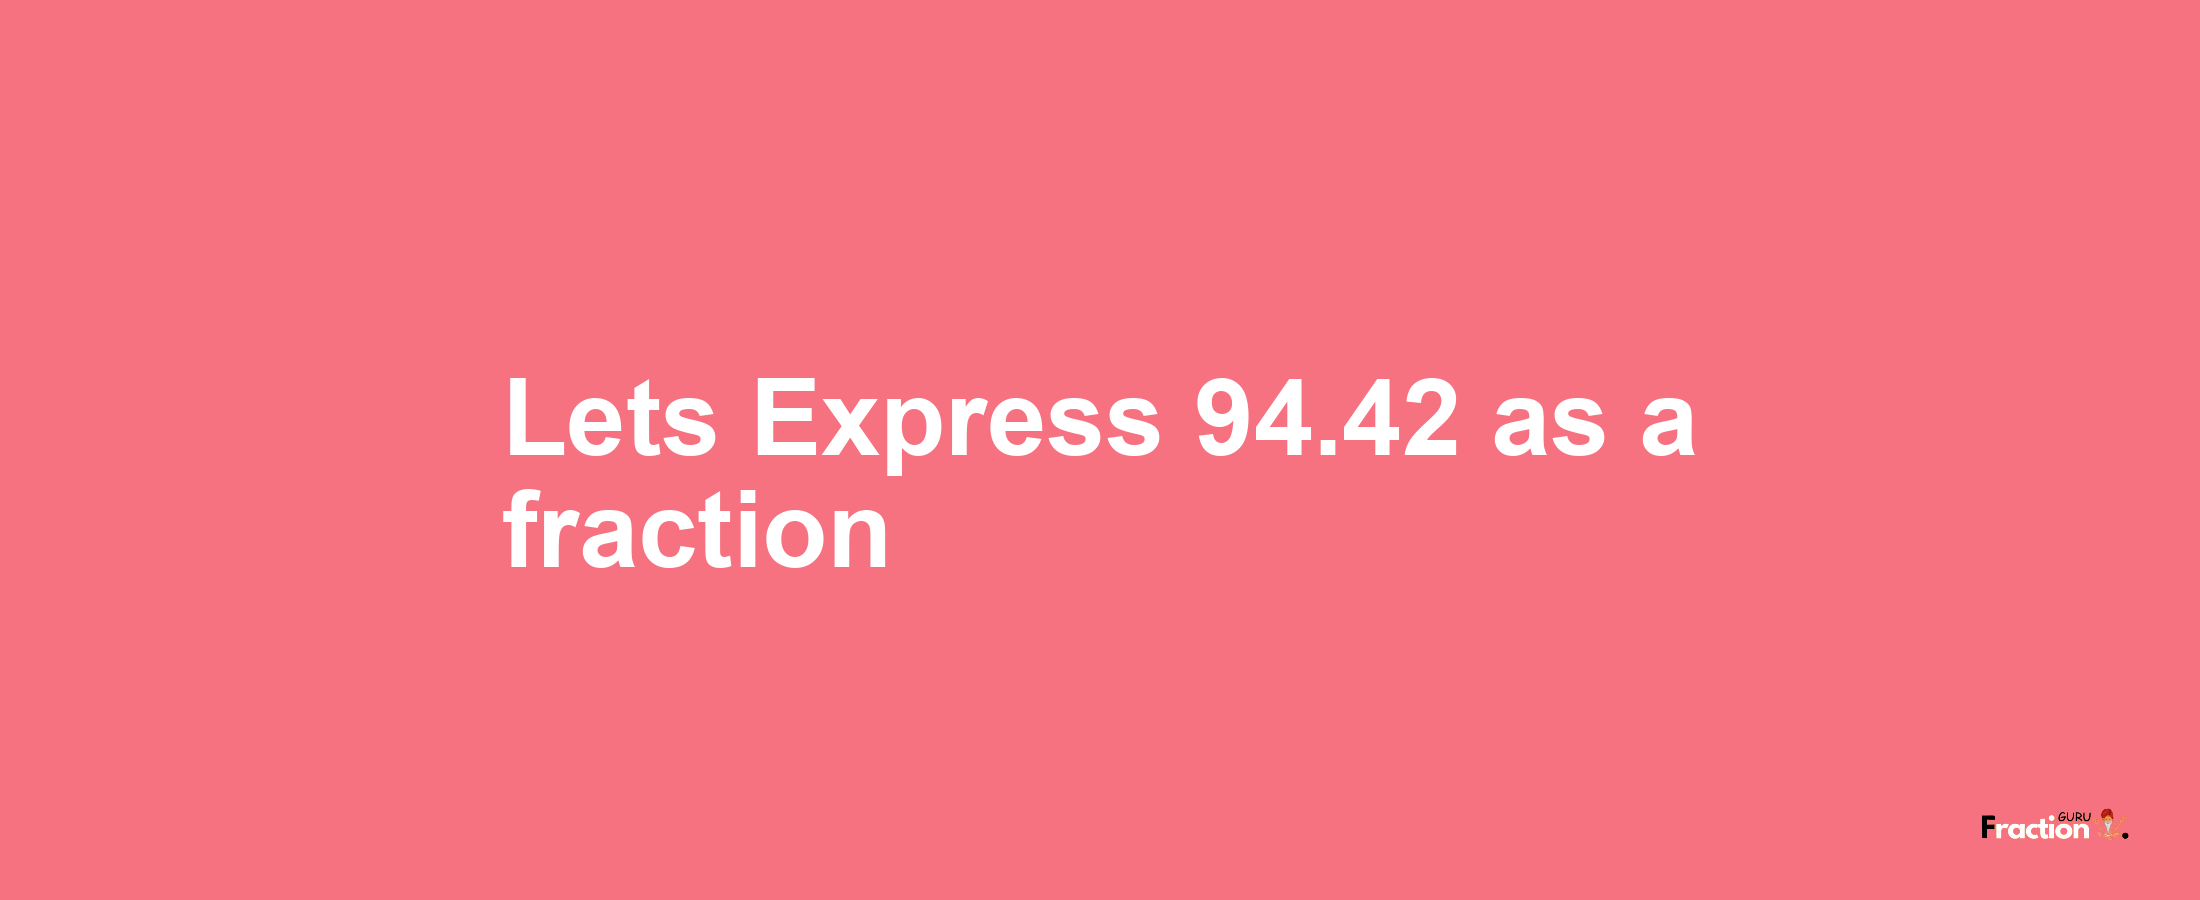 Lets Express 94.42 as afraction